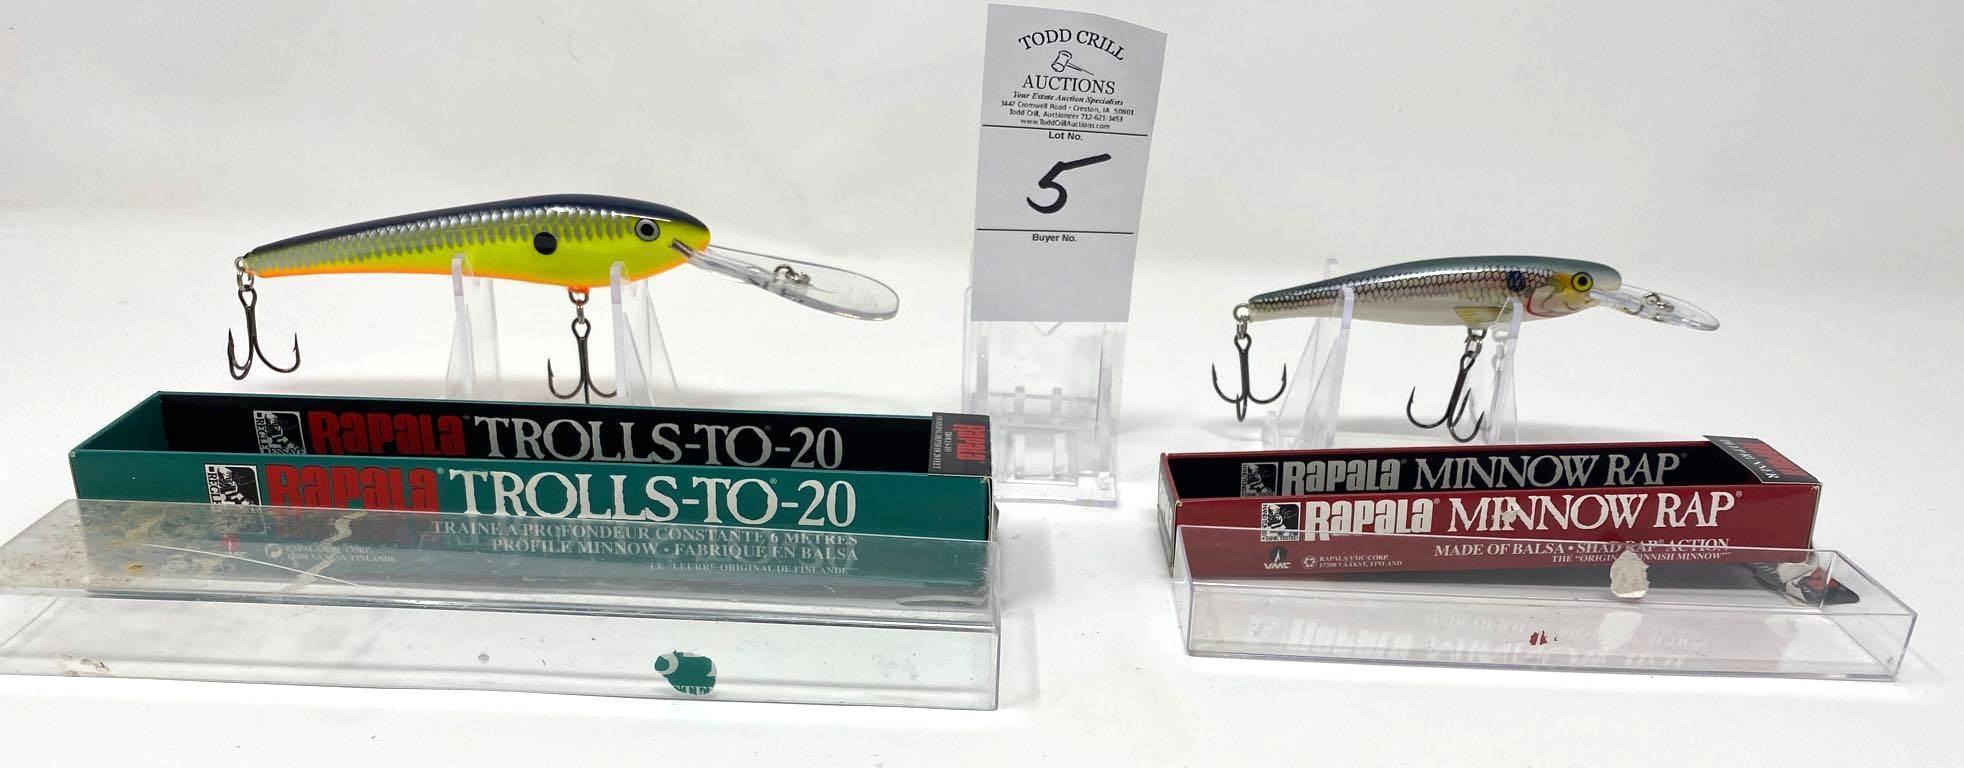 Two Rapala Lures